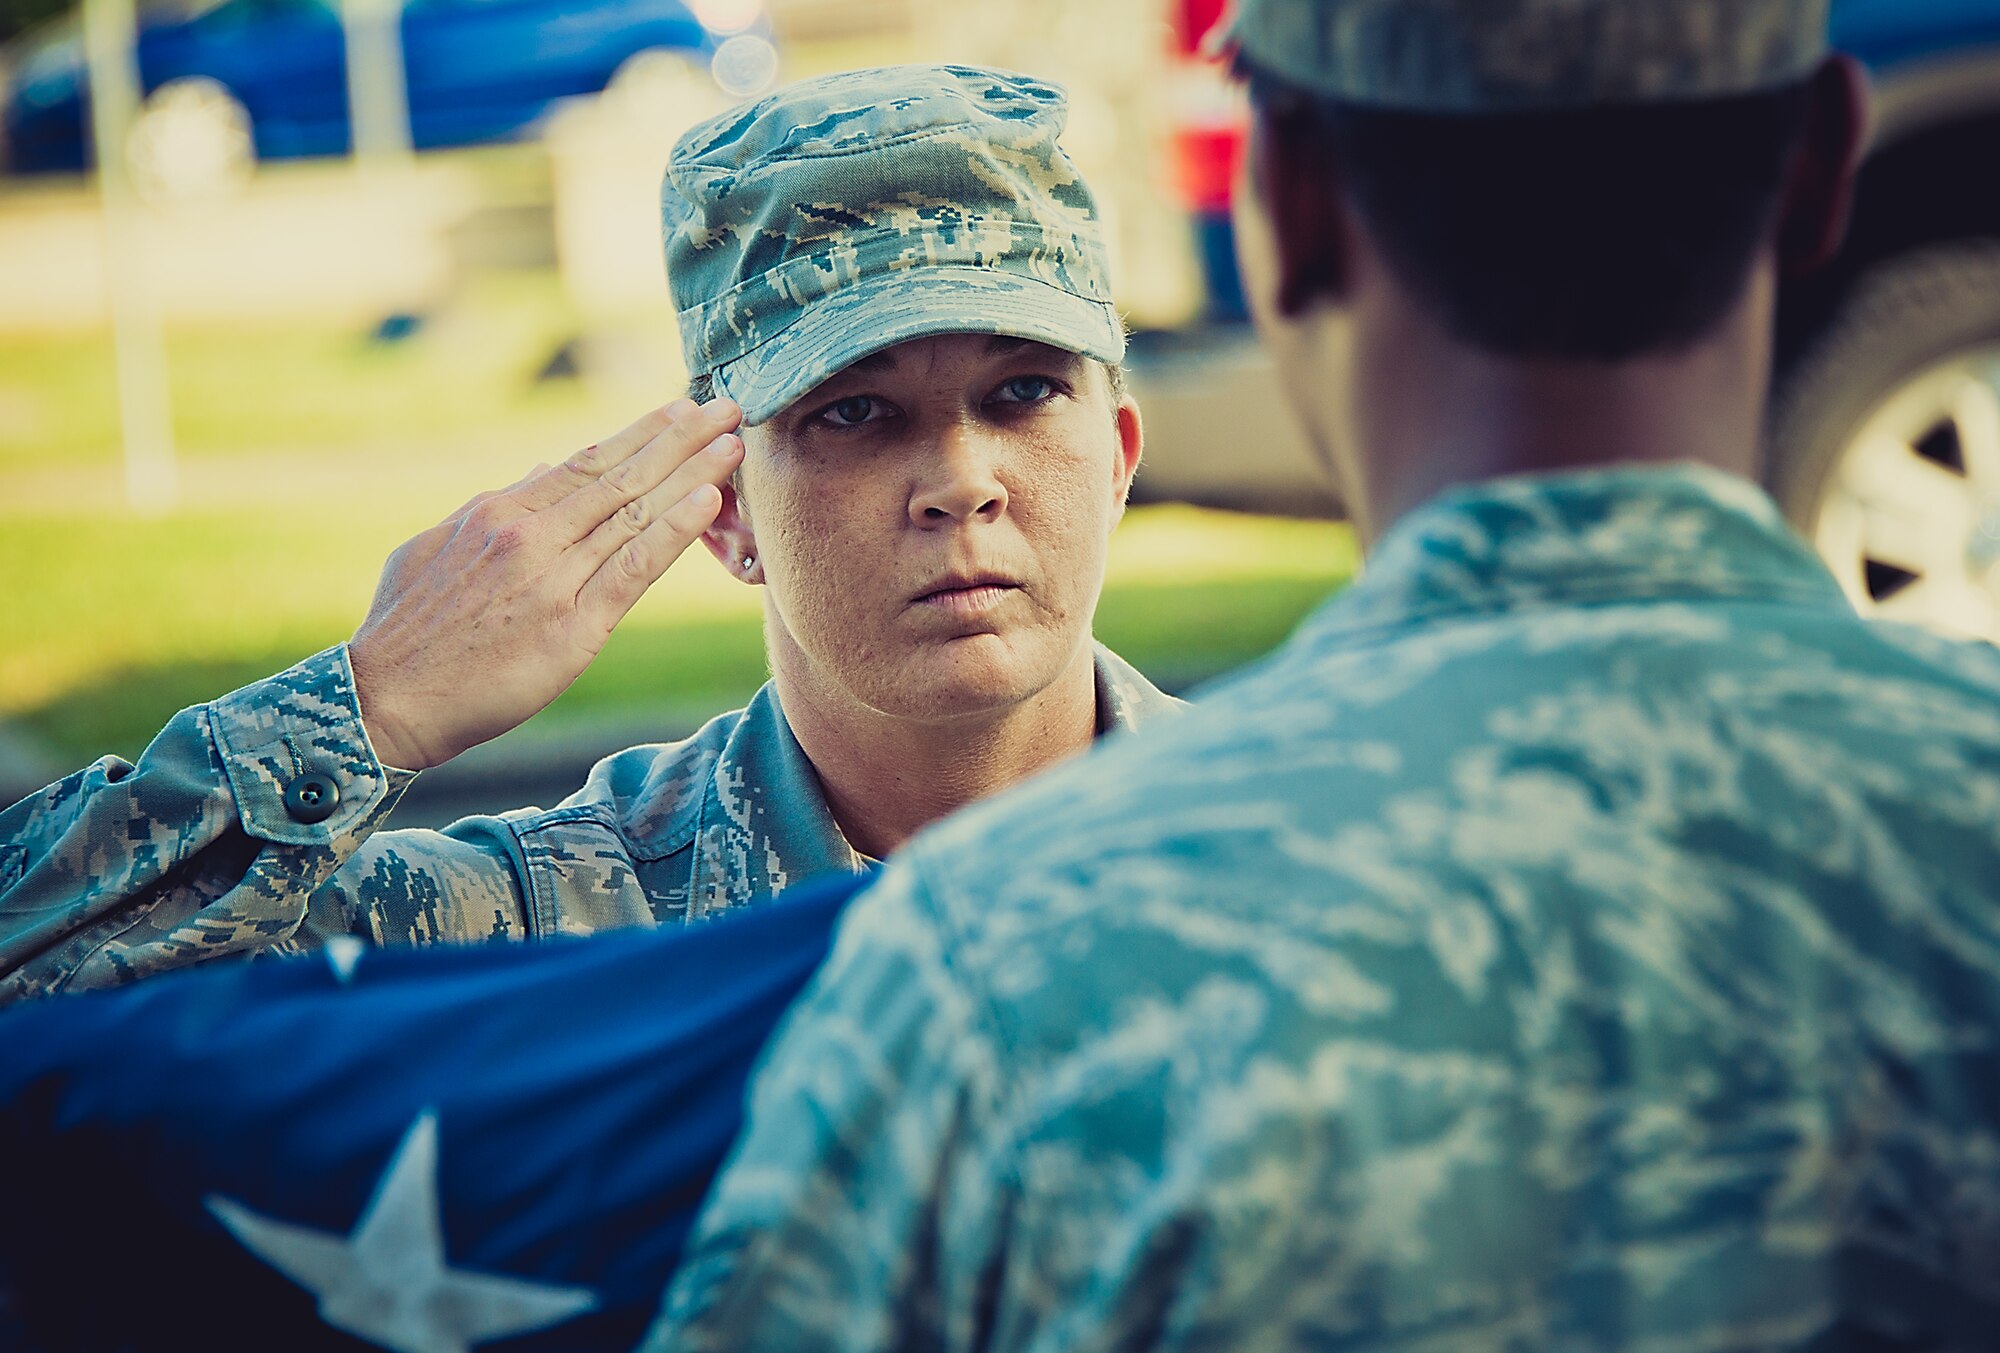 Master Sgt. Deaira Smith, Air Force Operational Test and Evaluation Center, Detachment 2, salutes after retiring the colors at the retreat ceremony March 29.  The flag detail and flight positions were filled by women in honor of Women’s History Month.  More than 30 women participated in the ceremony.  To see more photos of the all-women flag detail go to facebook.com/teameglin.  (U.S. Air Force photo/Samuel King Jr.)